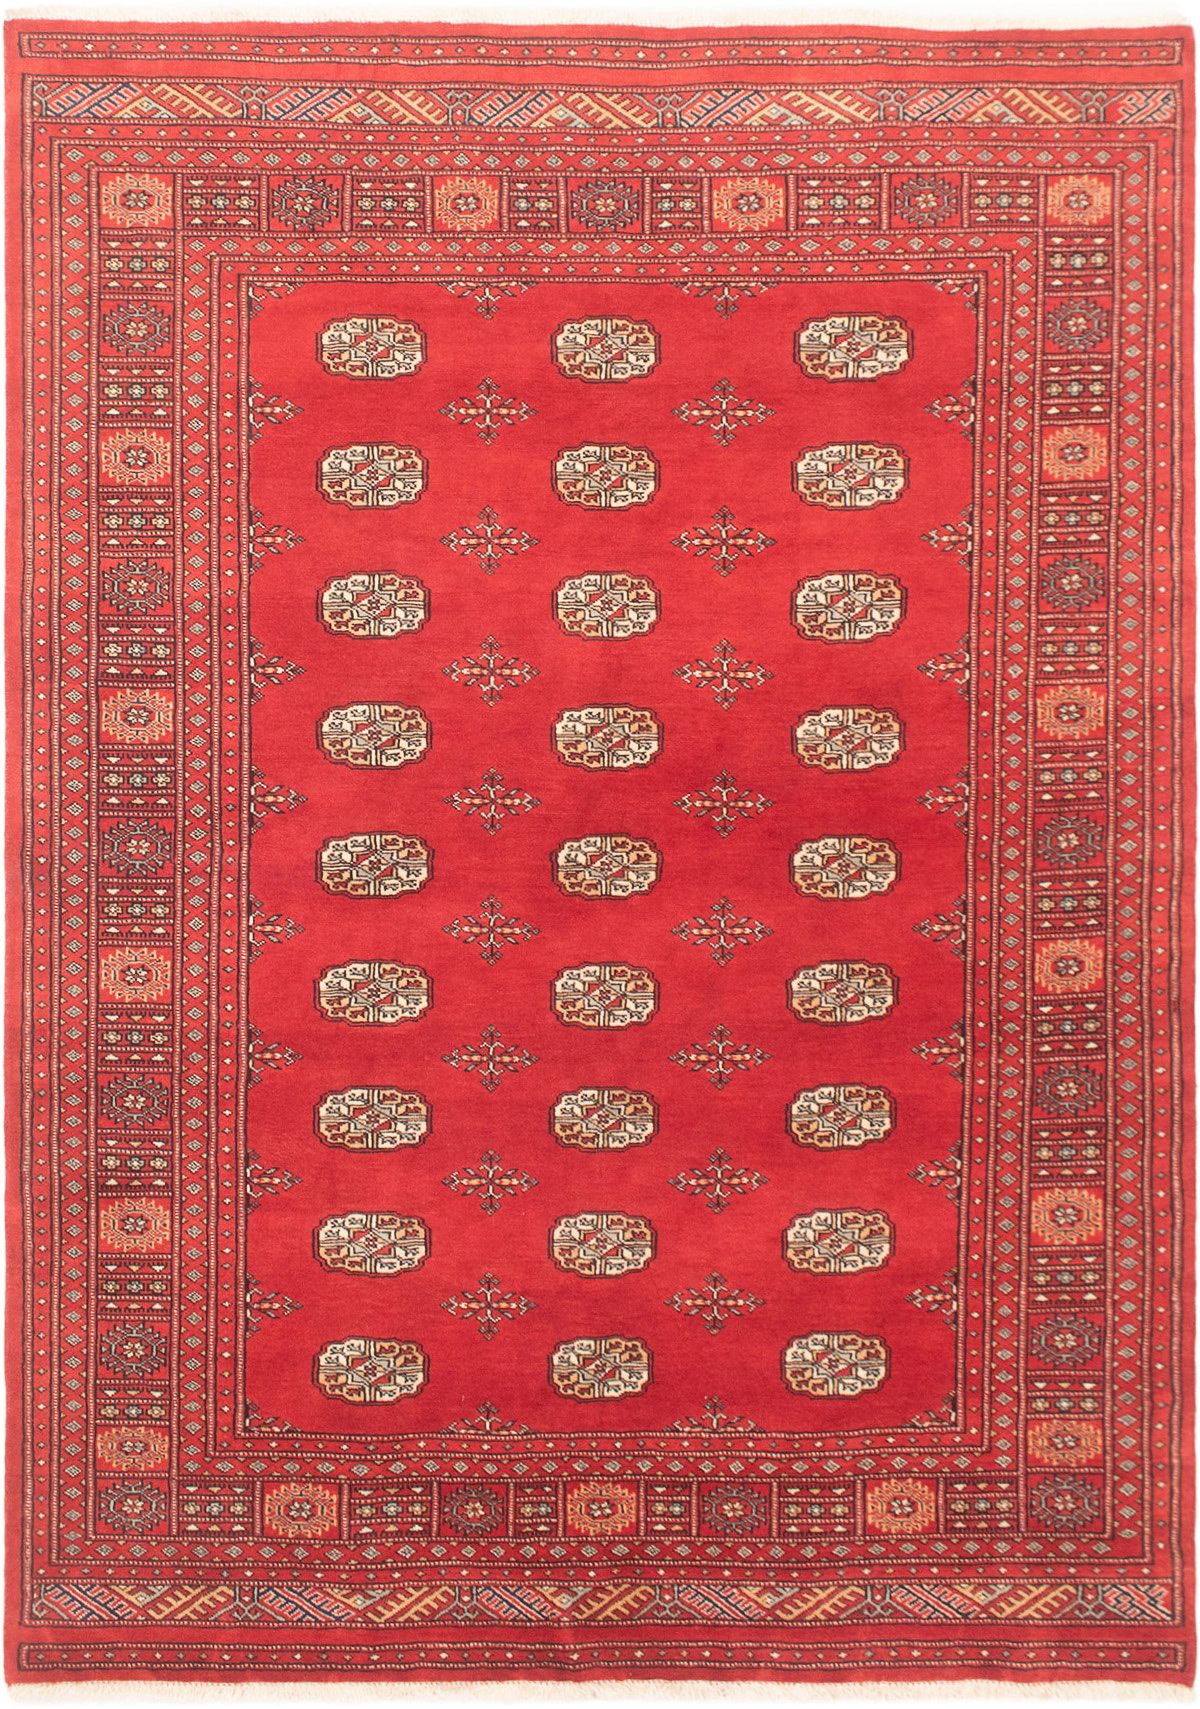 Hand-knotted Finest Peshawar Bokhara Red Wool Rug 5'10" x 8'4" Size: 5'10" x 8'4"  